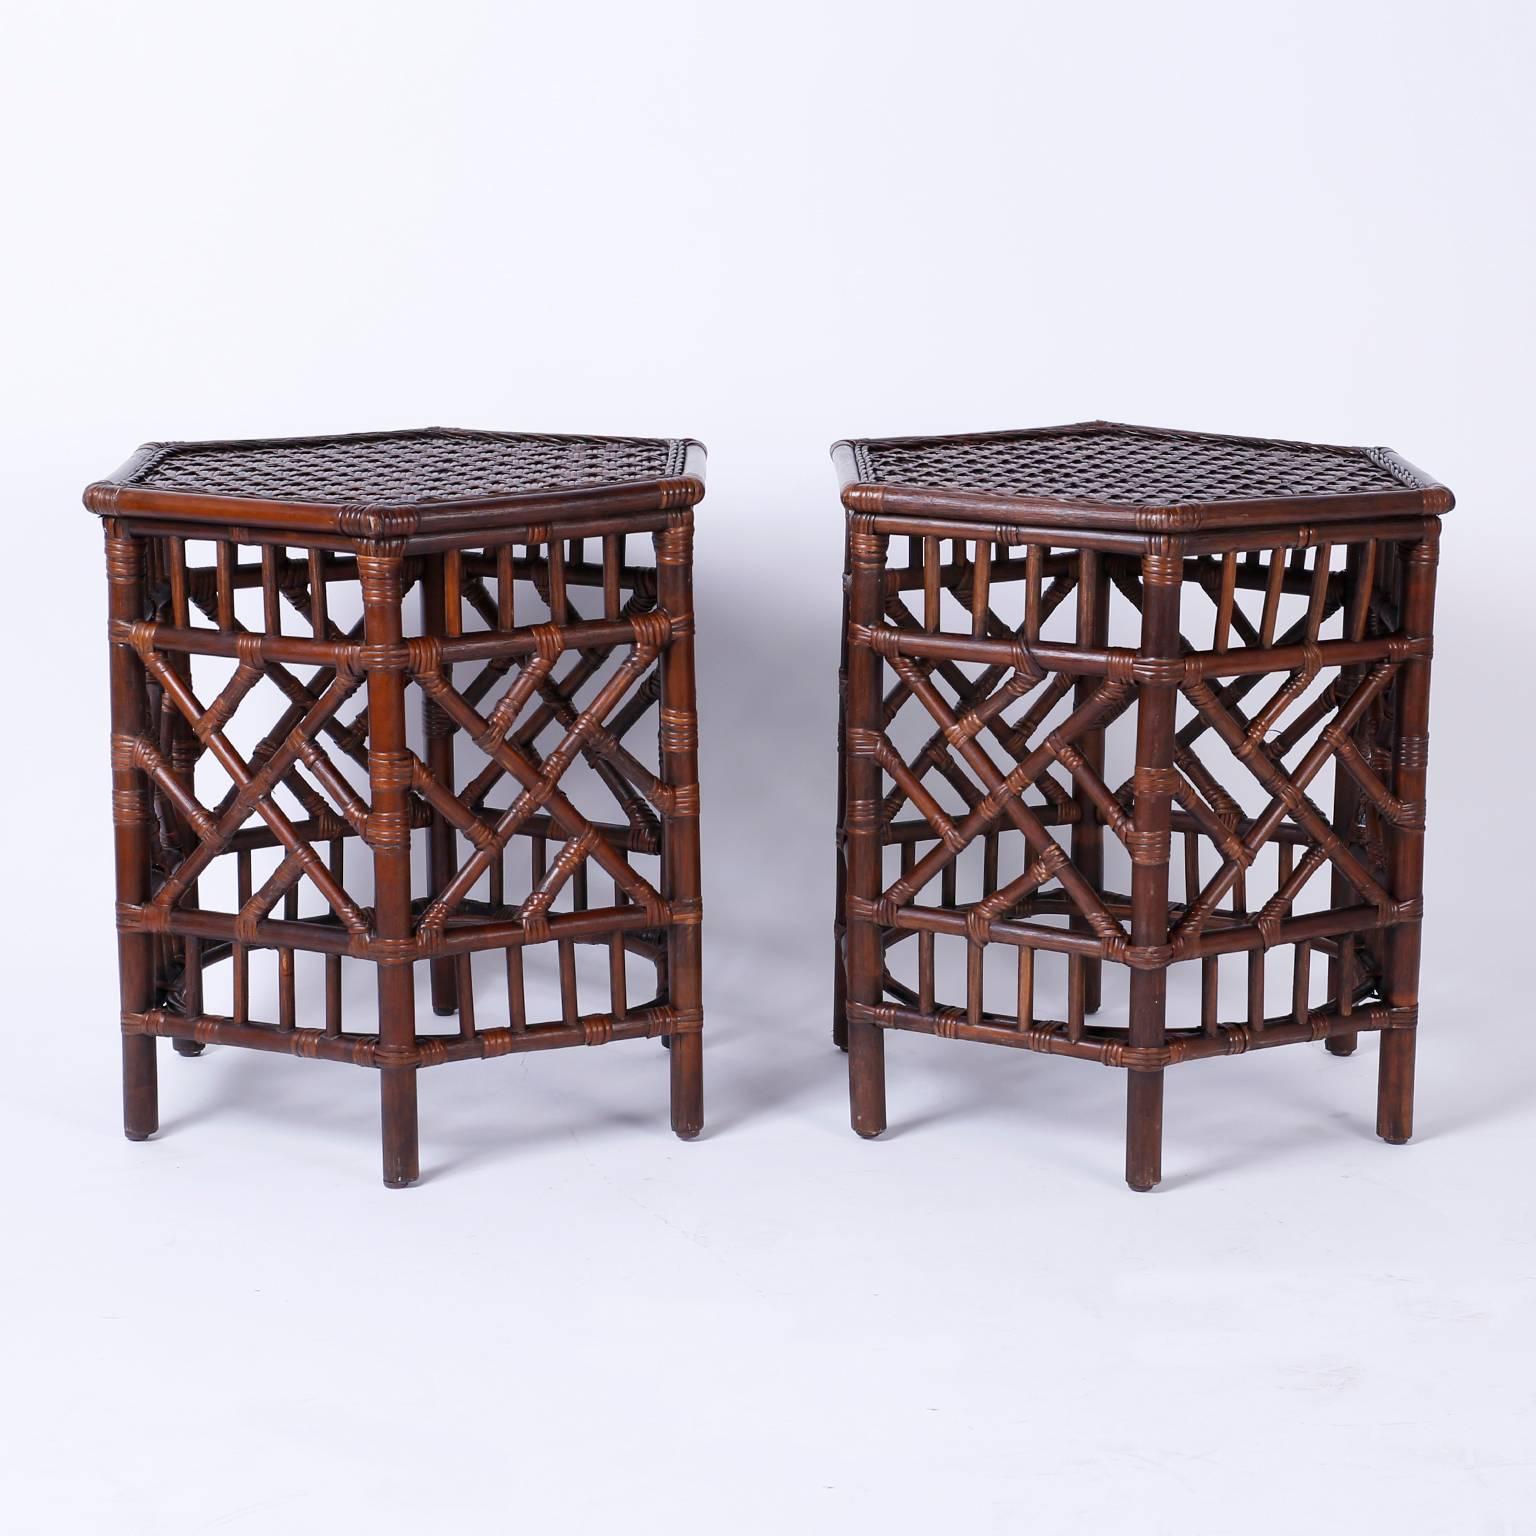 Pair of British Colonial style bamboo, rattan or wicker end tables or stands with woven reed hexagon tops and Chinese Chippendale style panels on all six sides.